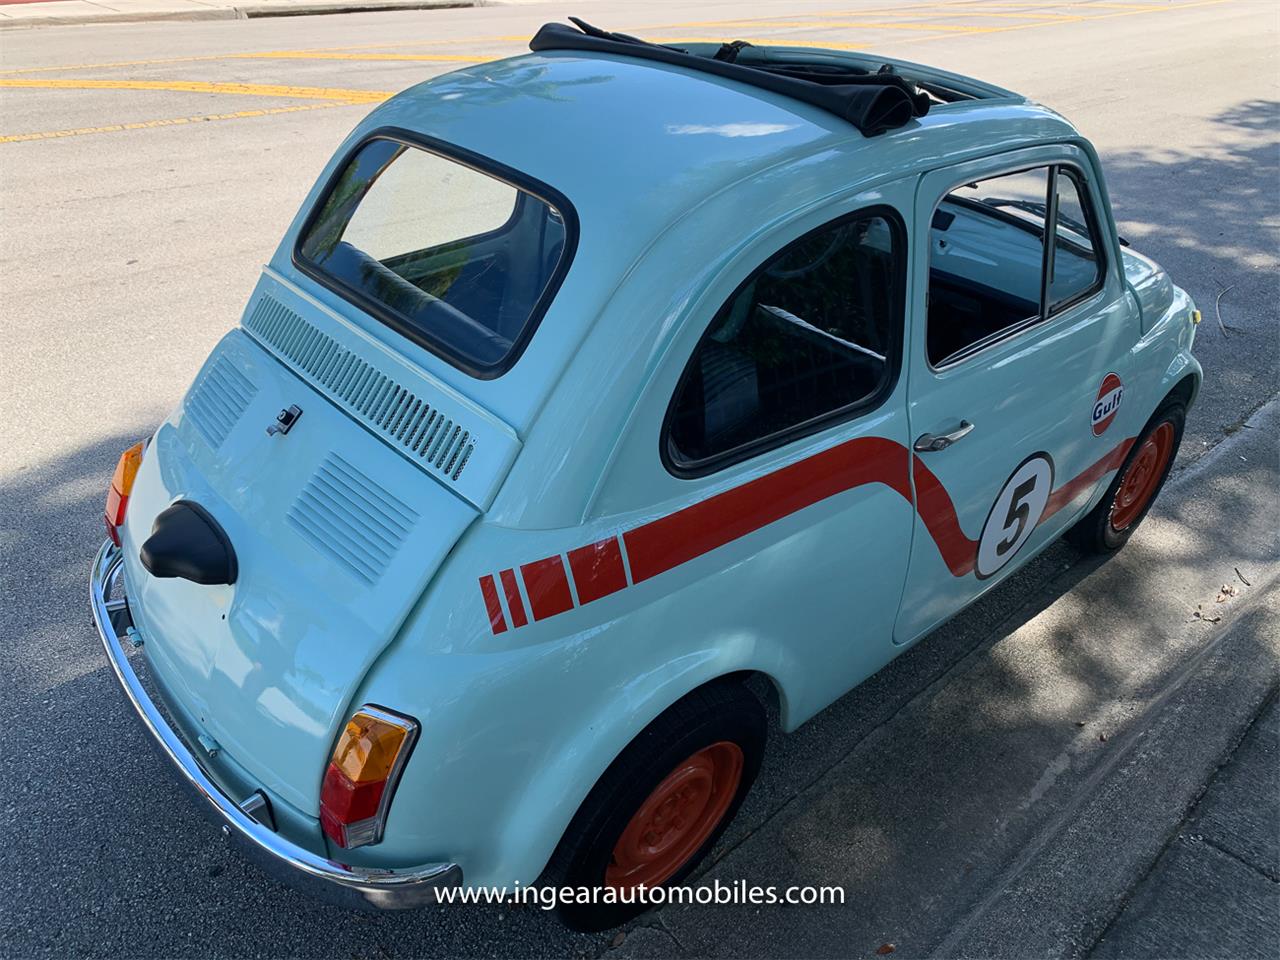 1974 fiat 500, Pick of the Day: 1974 Fiat 500, ClassicCars.com Journal